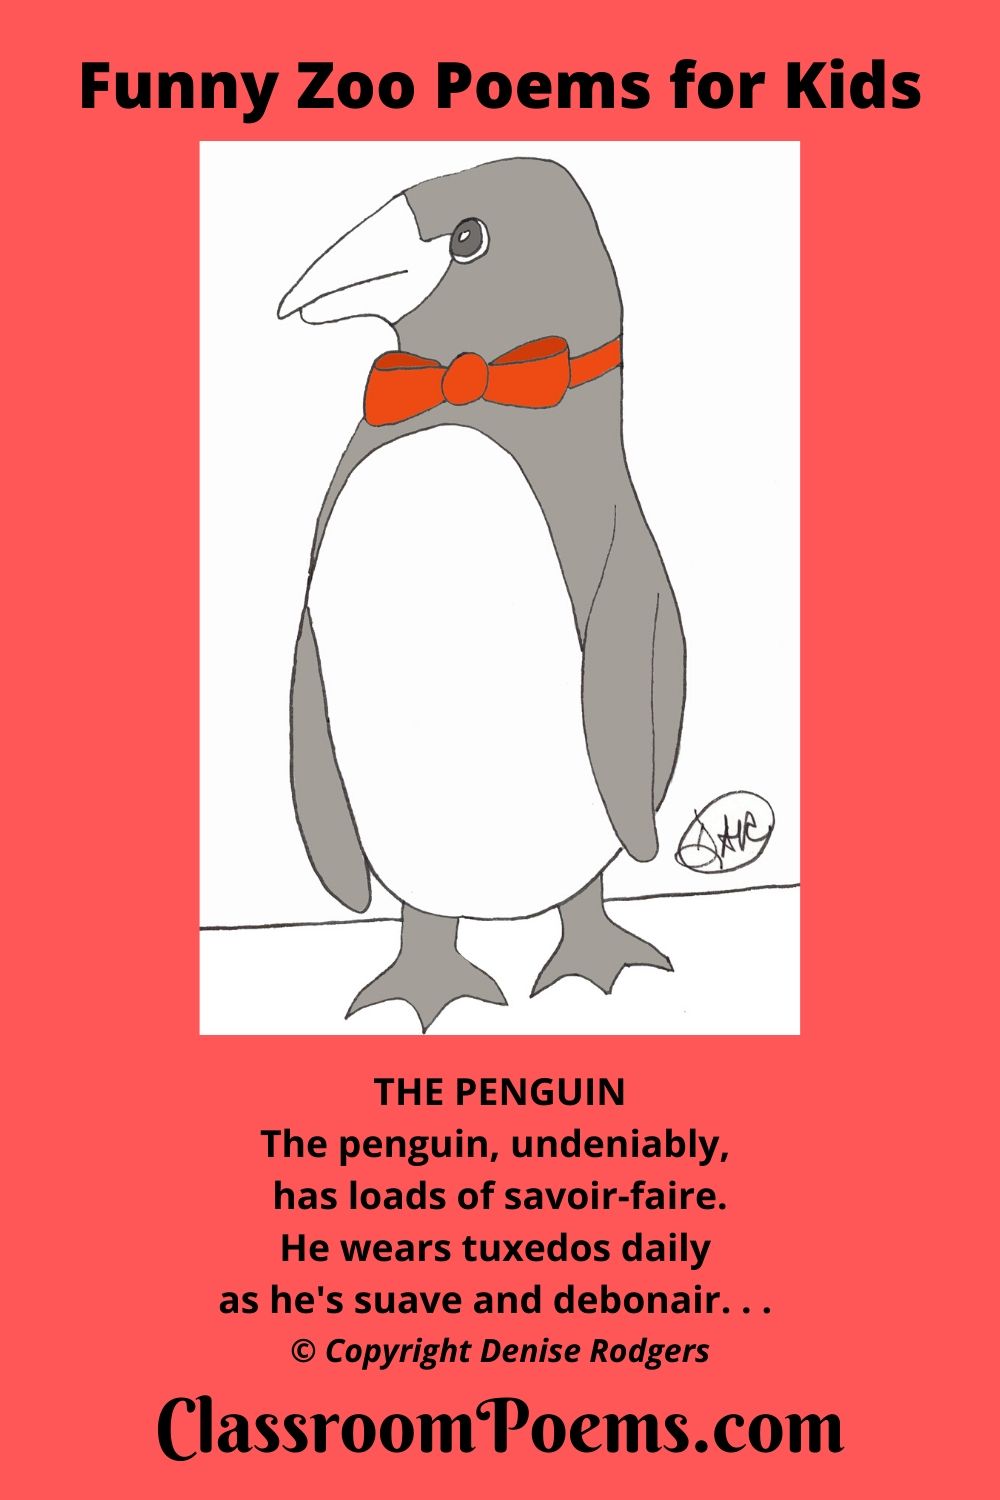 Penguin poem and drawing. THE PENGUIN poem by Denise Rodgers on ClassroomPoems.com.